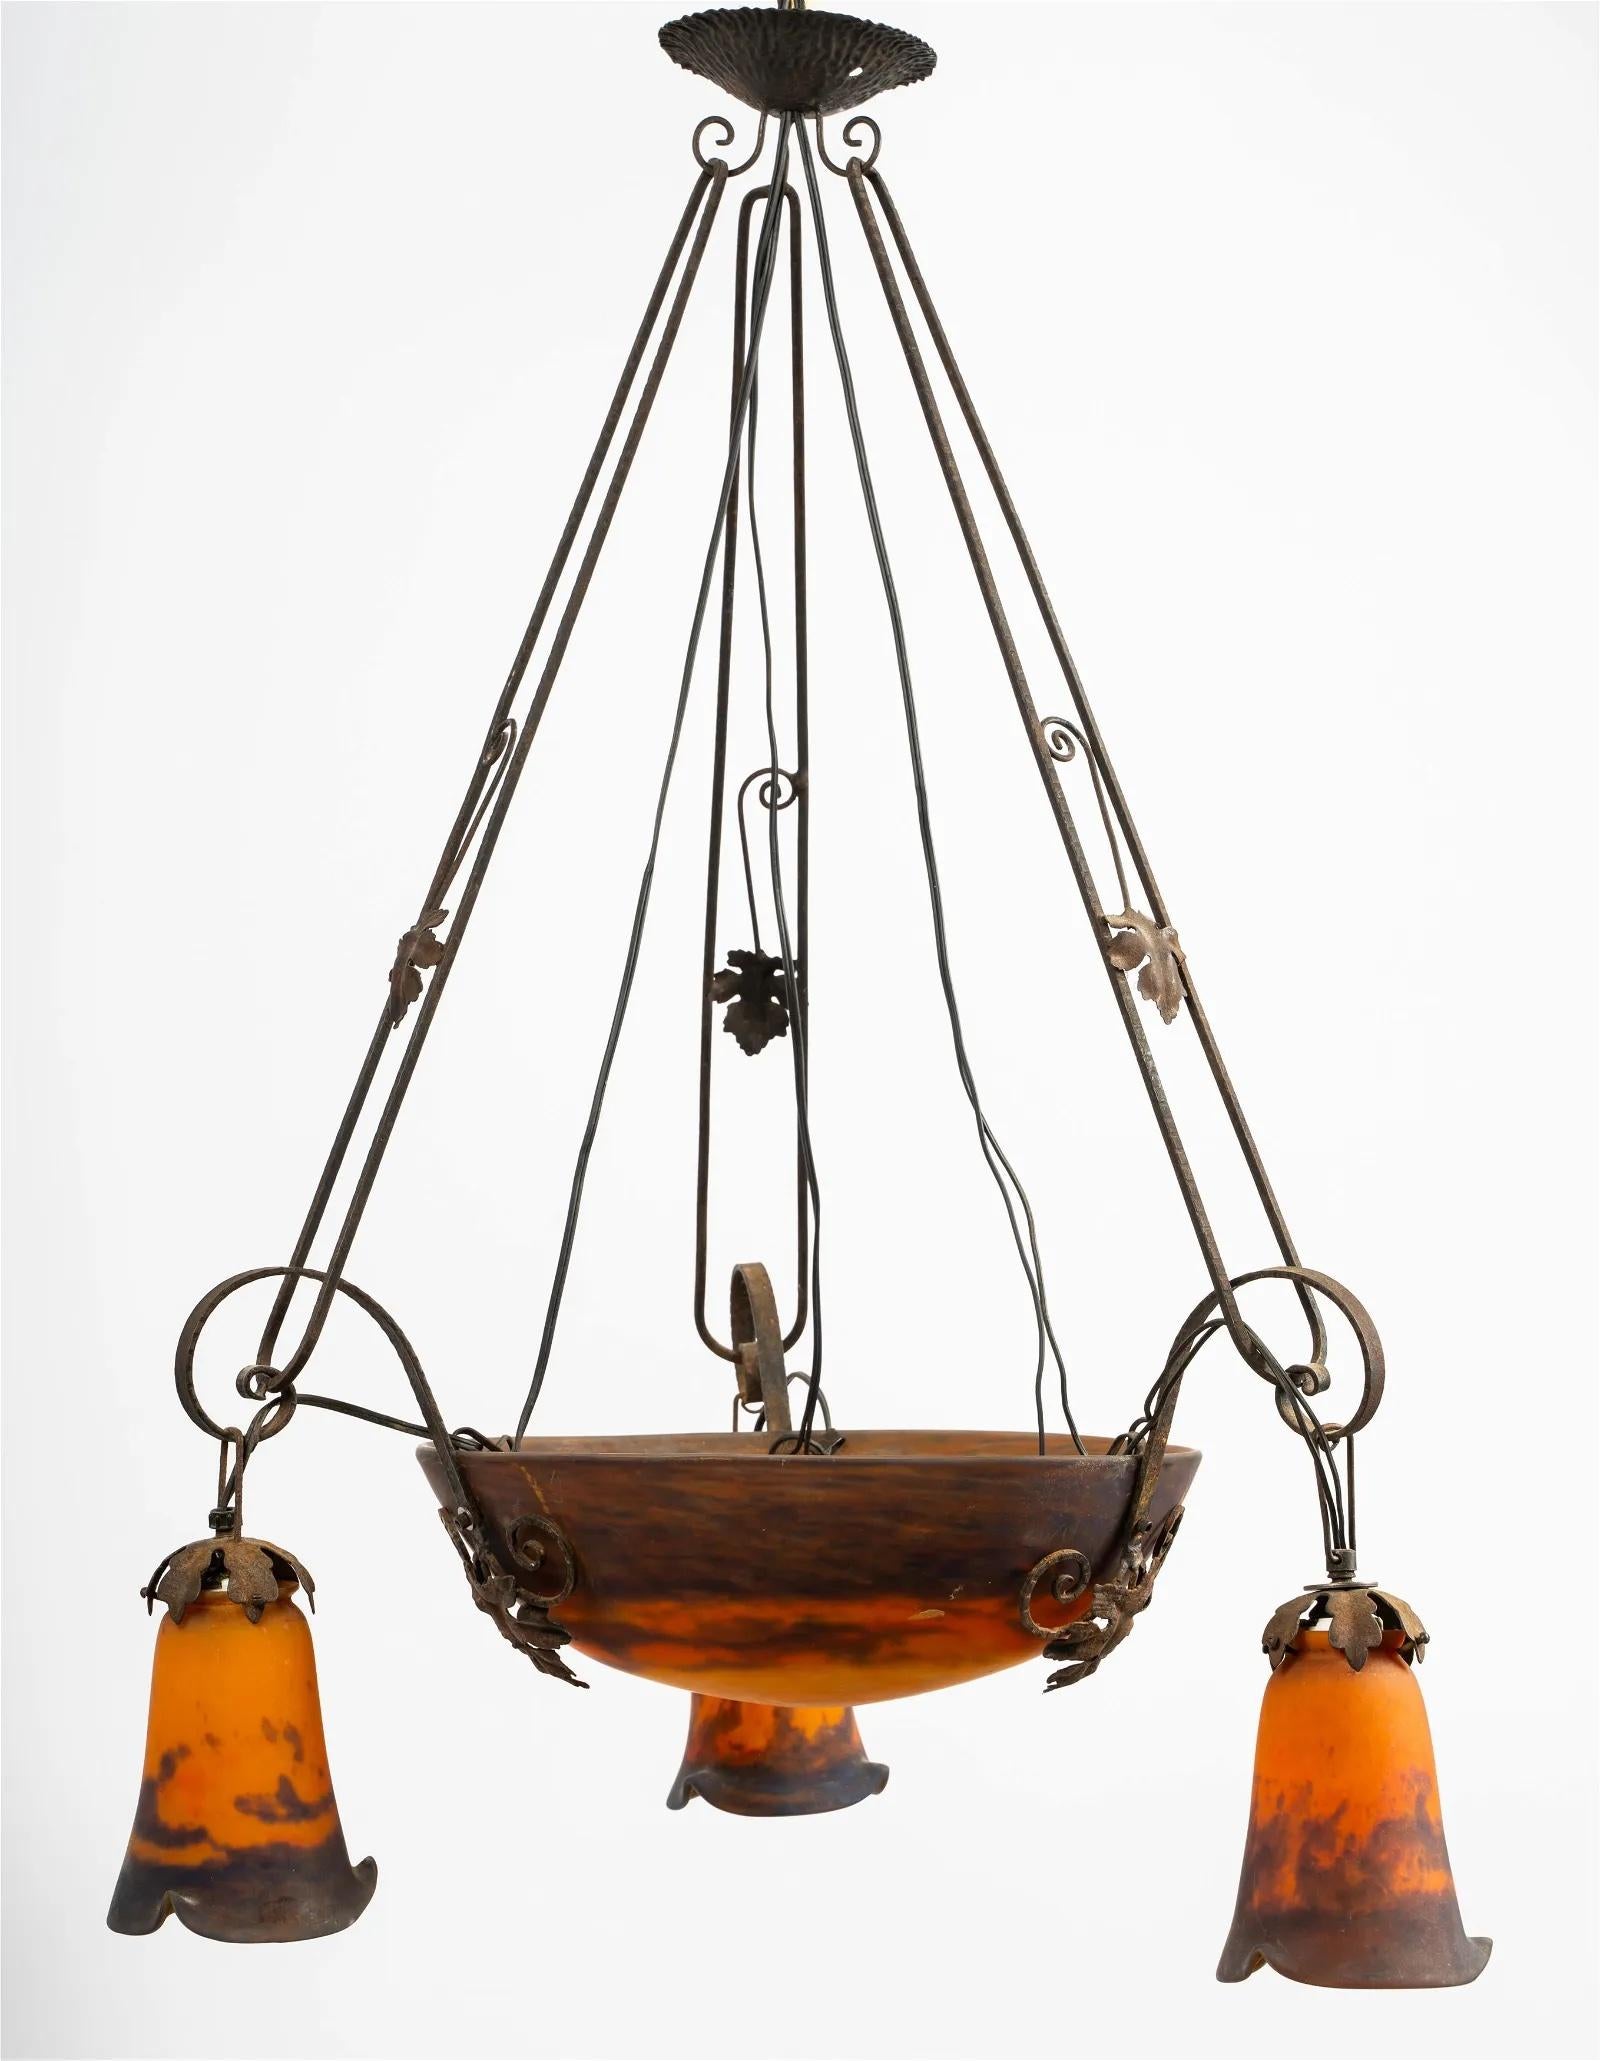 Circa 1900 French Art Nouveau Muller Freres Luneville Art Glass Chandelier. Signed glass shades. The metal frame with three arms suspending a mottled orange and purple bowl fitted with three candelabra sockets on the interior, and three conforming